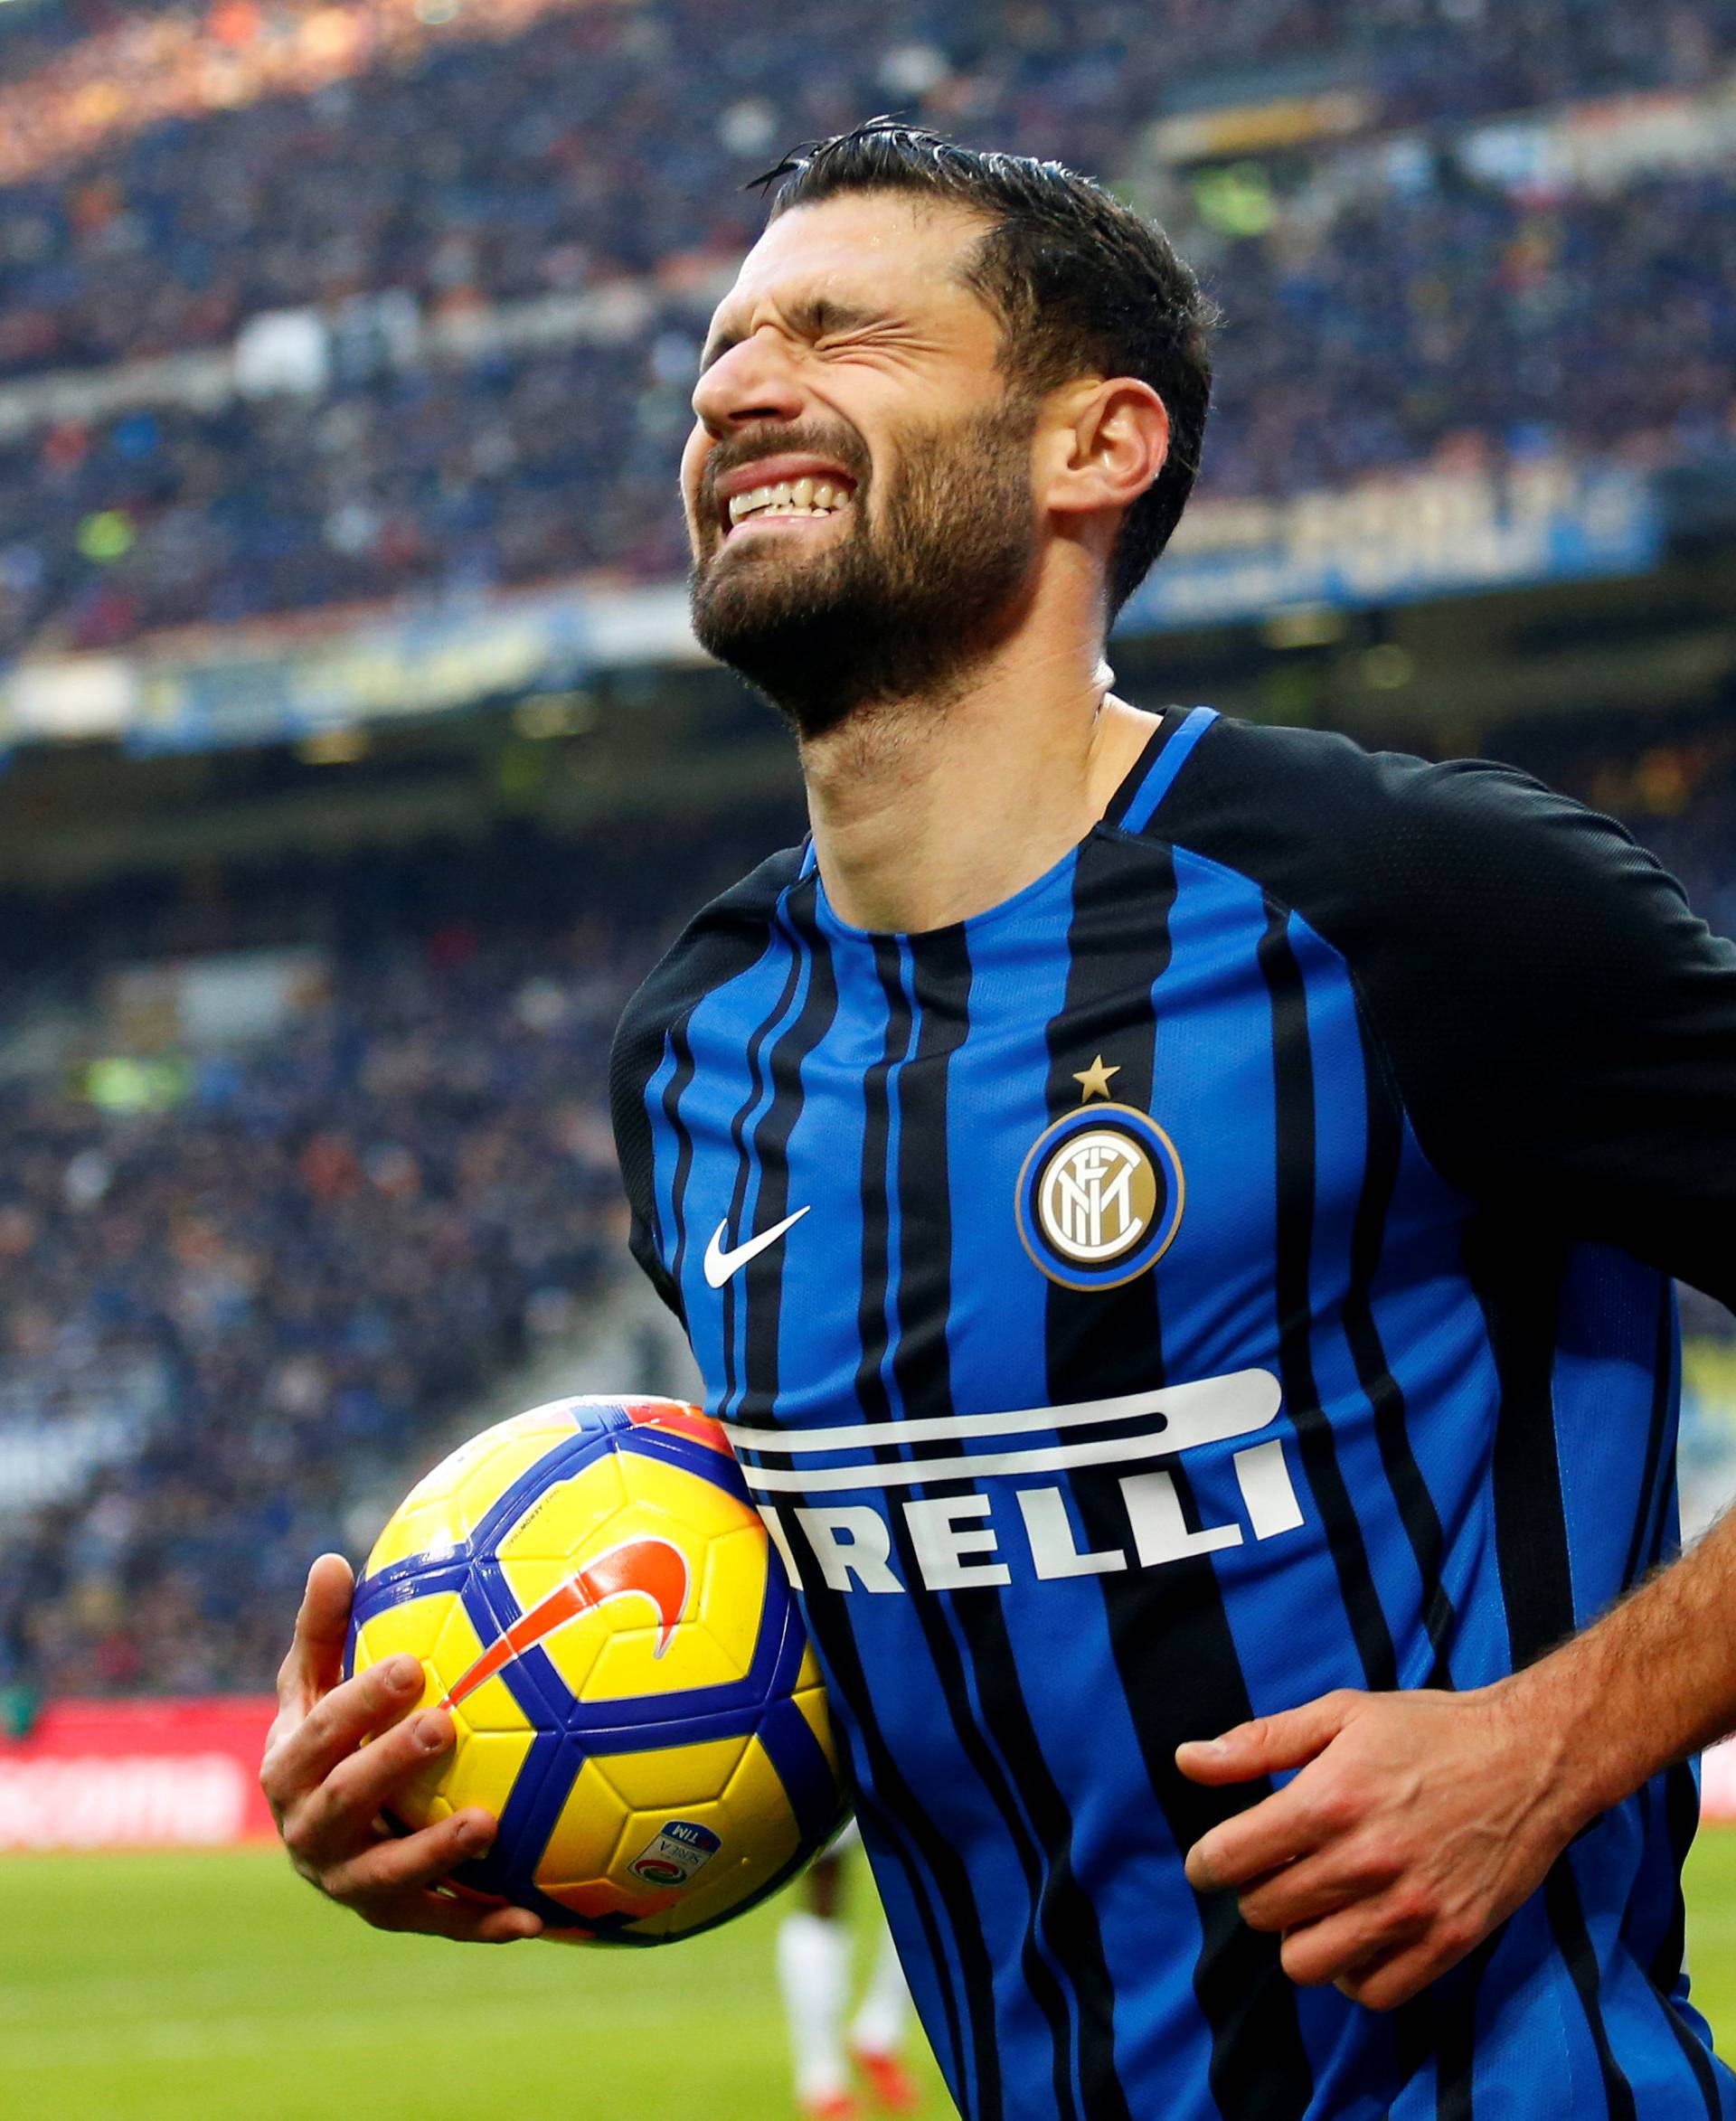 Serie A - Inter Milan vs Udinese